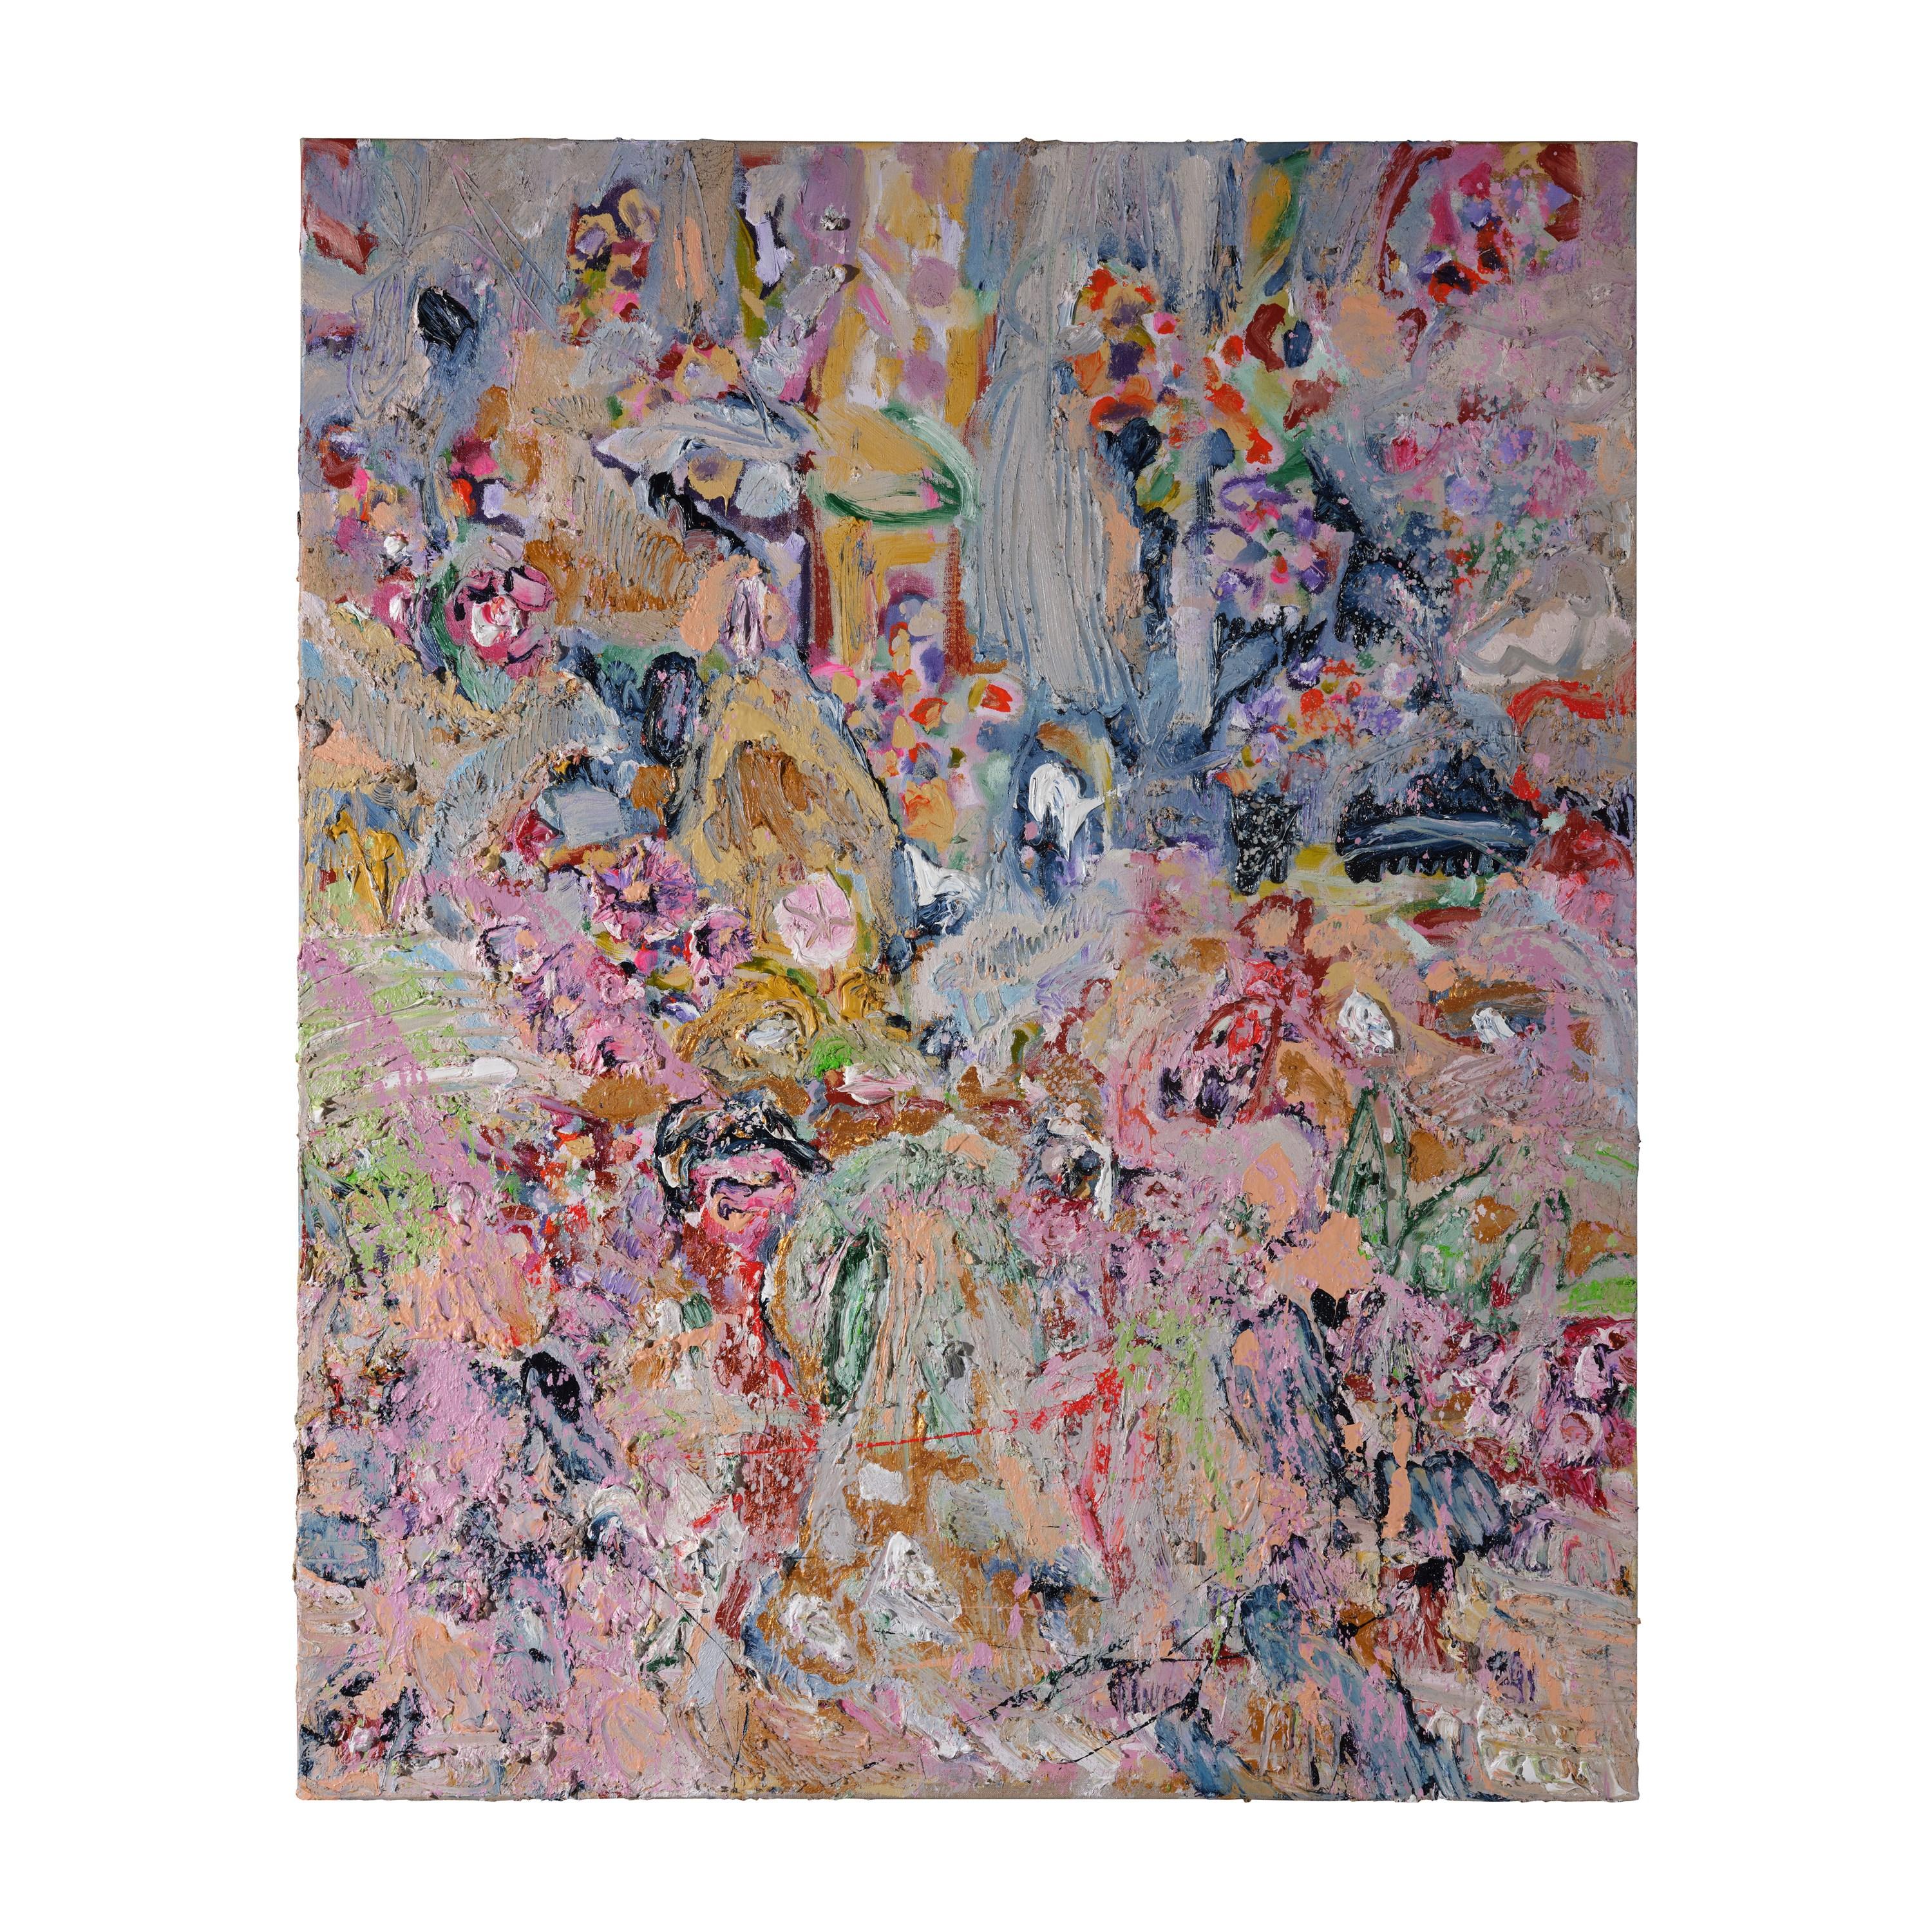 'Les Champs Fleurissent' is a unique oil painting by the Dutch artist, Maarten Vrolijk.

Enthralled by flowers and the power of nature, Vrolijk’s vibrant and joyous paintings are applied layer over layer, creating a richness and depth within his oil